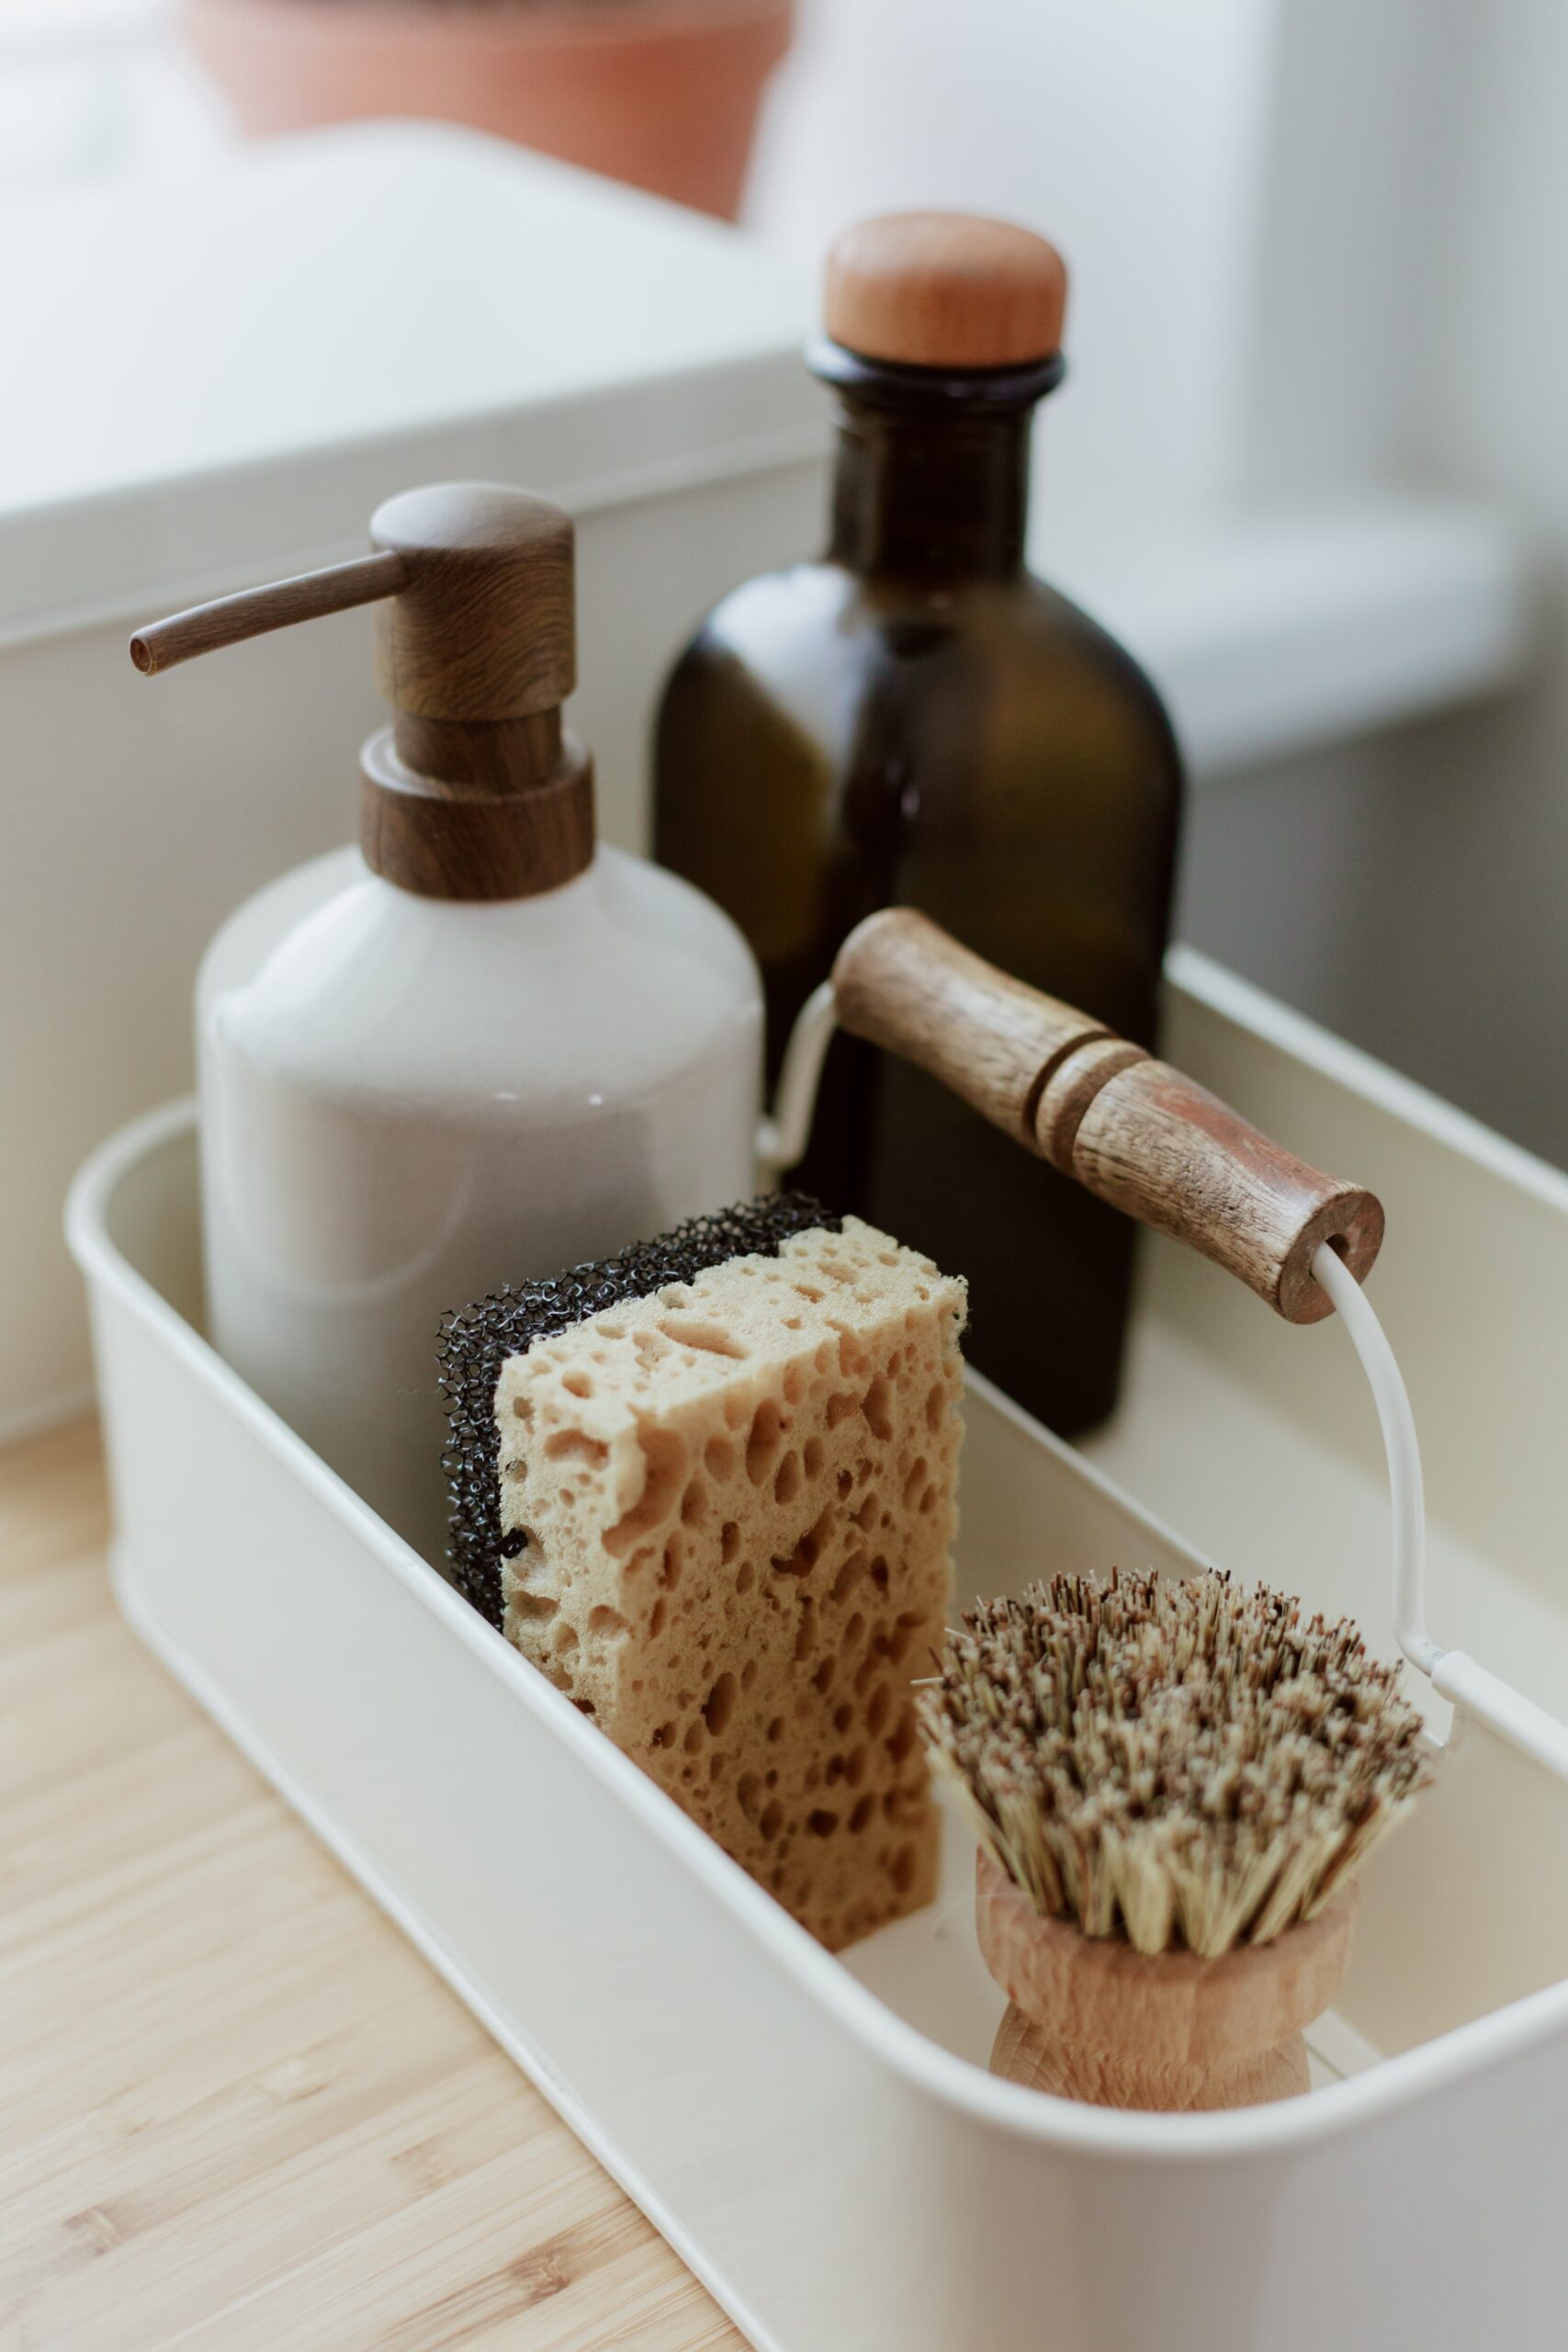 best fragrances for cleaning products